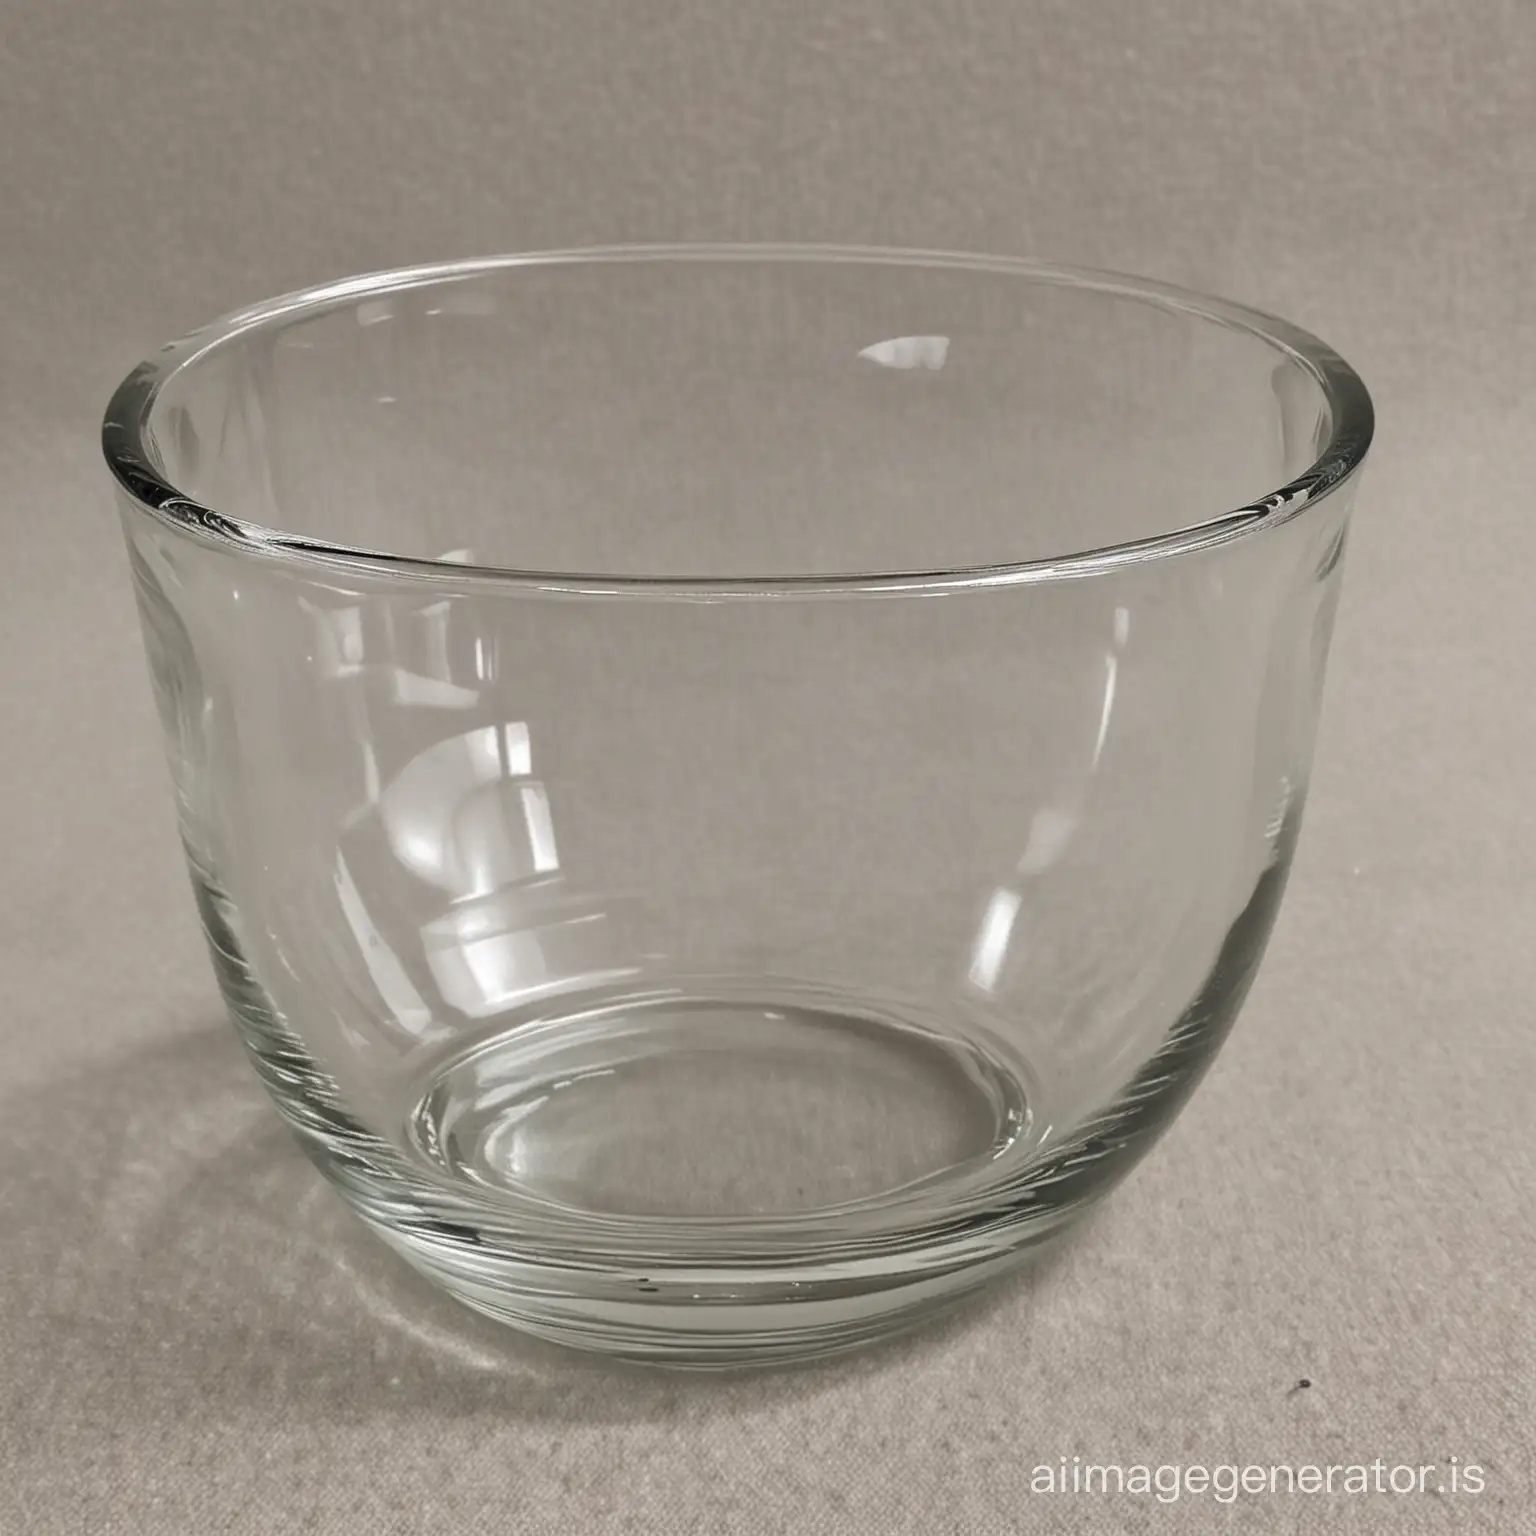 an empty clear glass bowl vase that is about 5" high and 5" wide